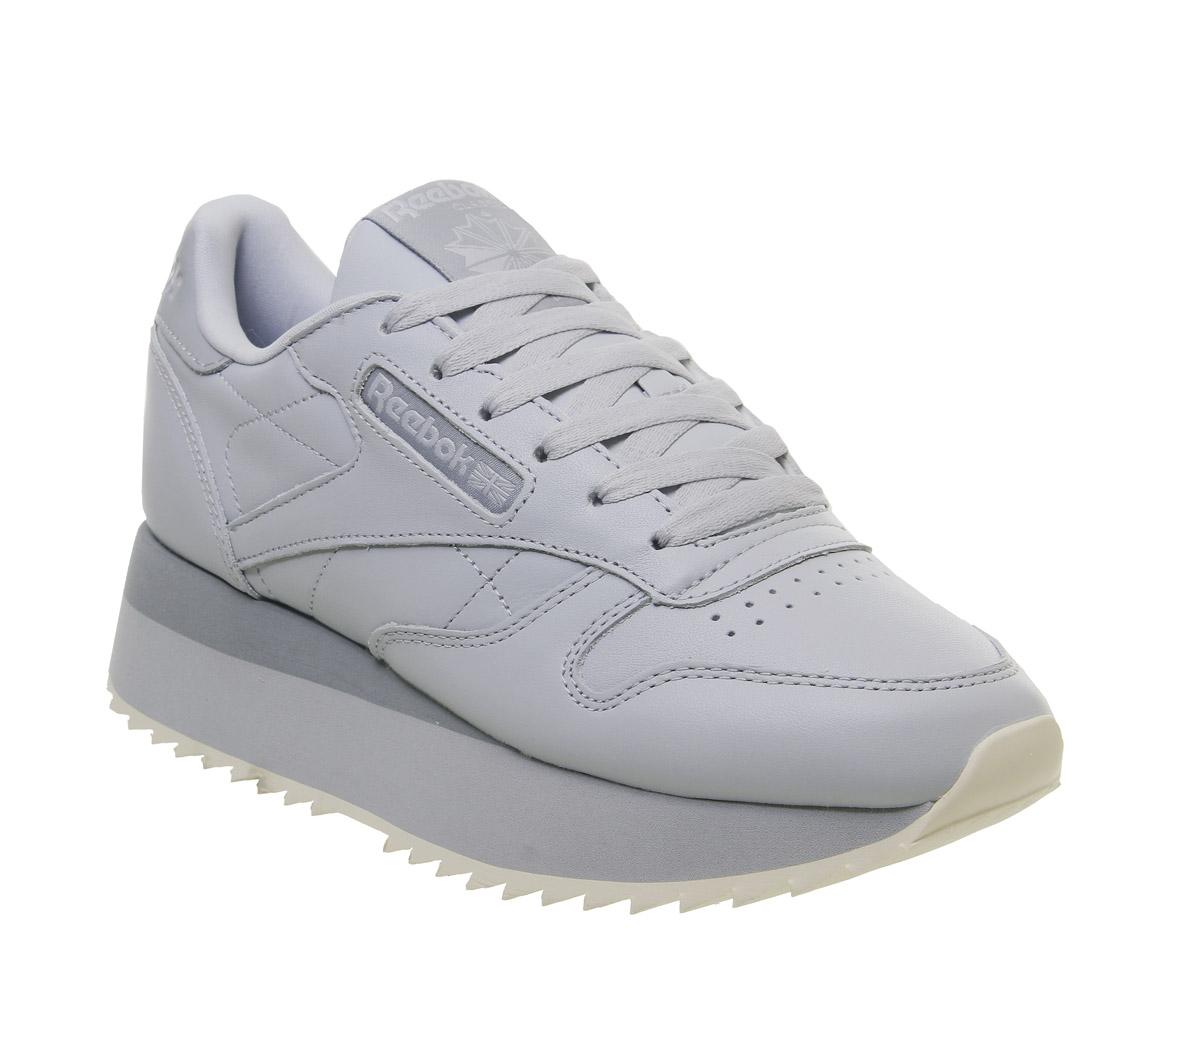 reebok classic leather zip trainers in pink